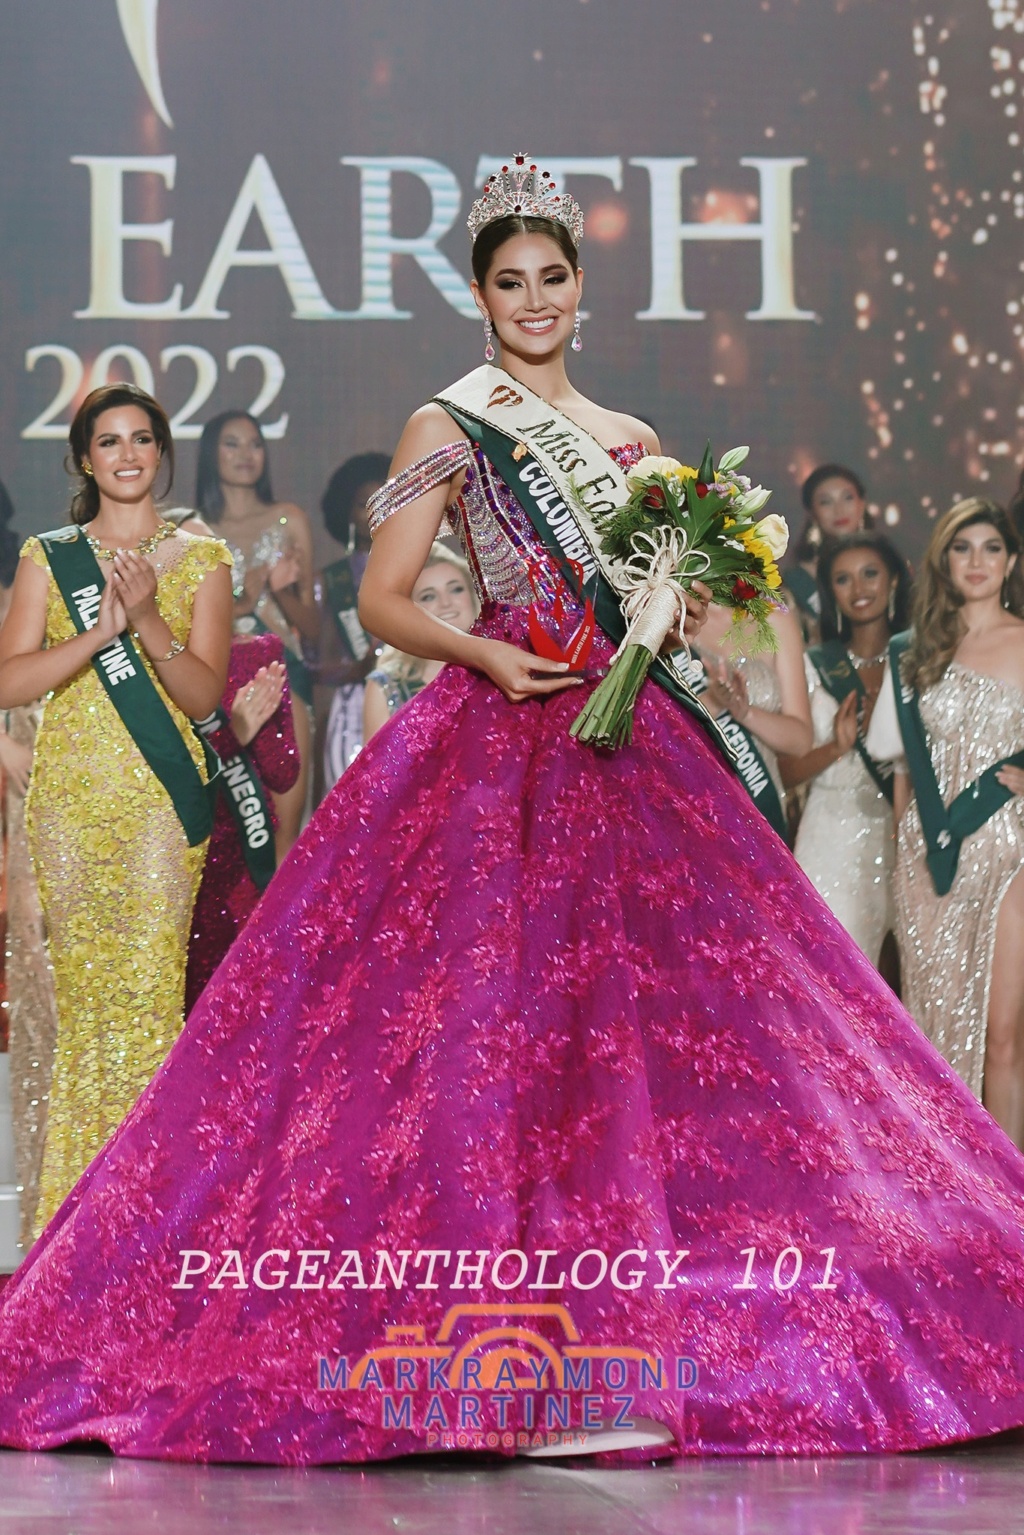 Andrea Aguilera (COLOMBIA WORLD 2021 & EARTH 2022) - Miss Earth Fire 2022 - Page 2 31749410